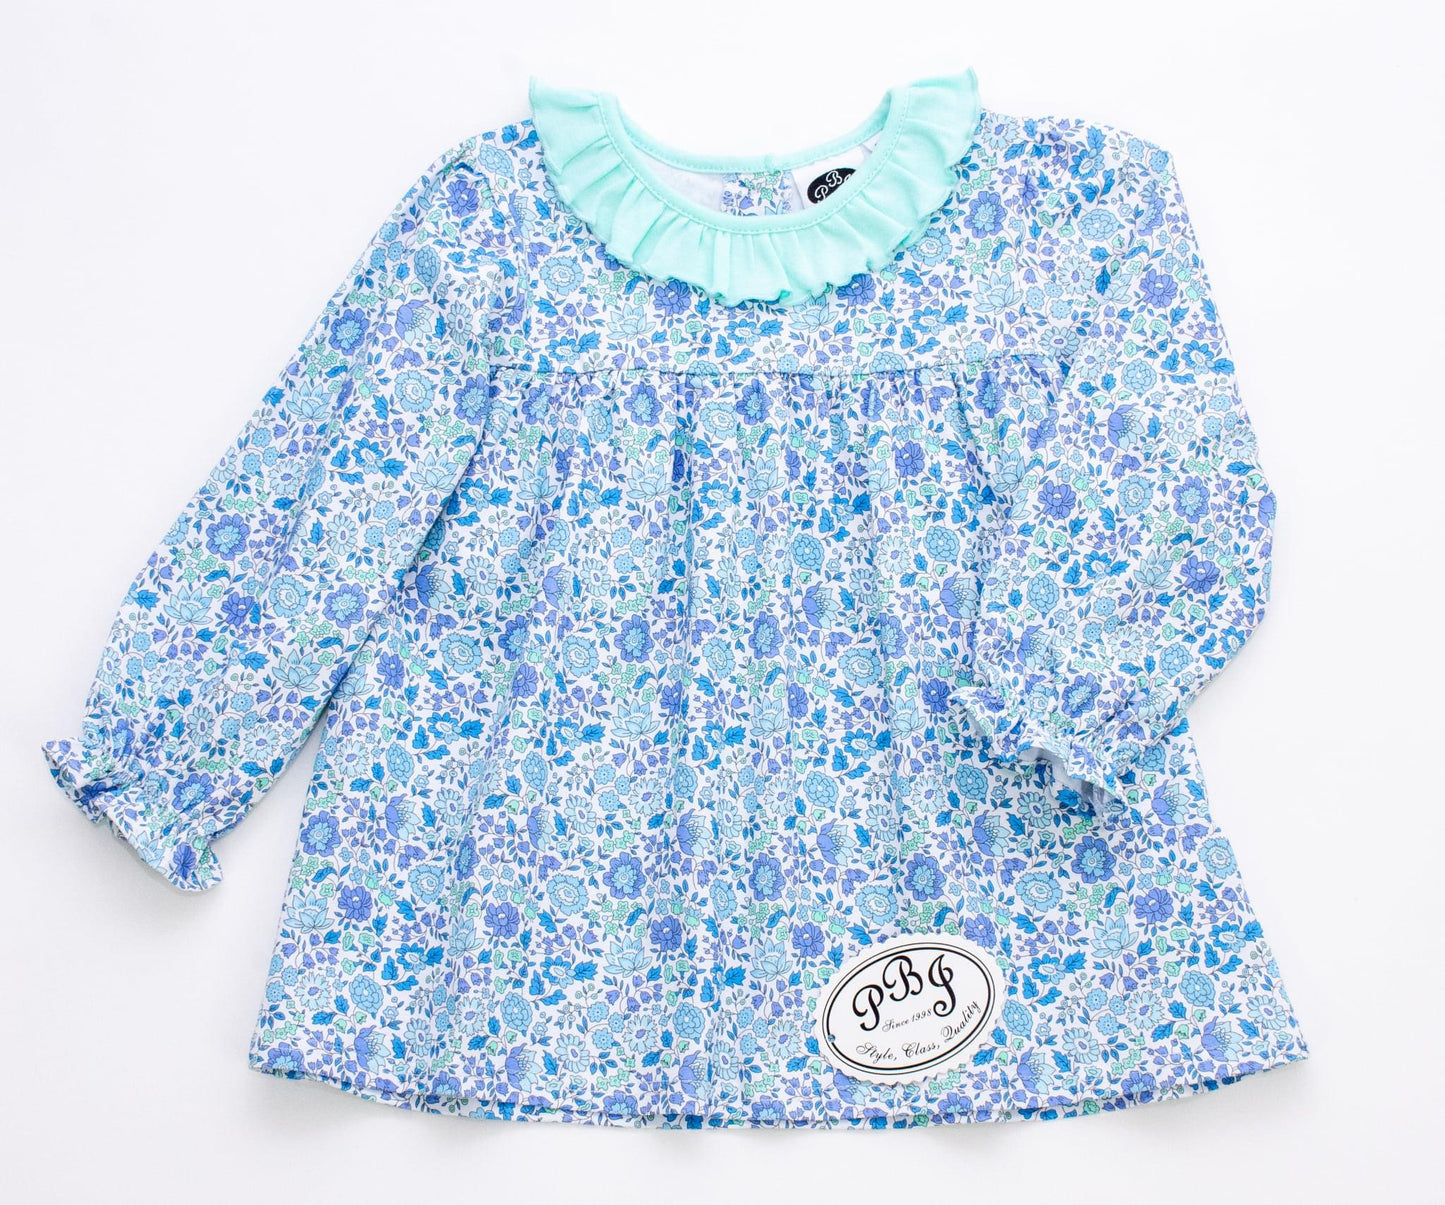 Lilly girl top*